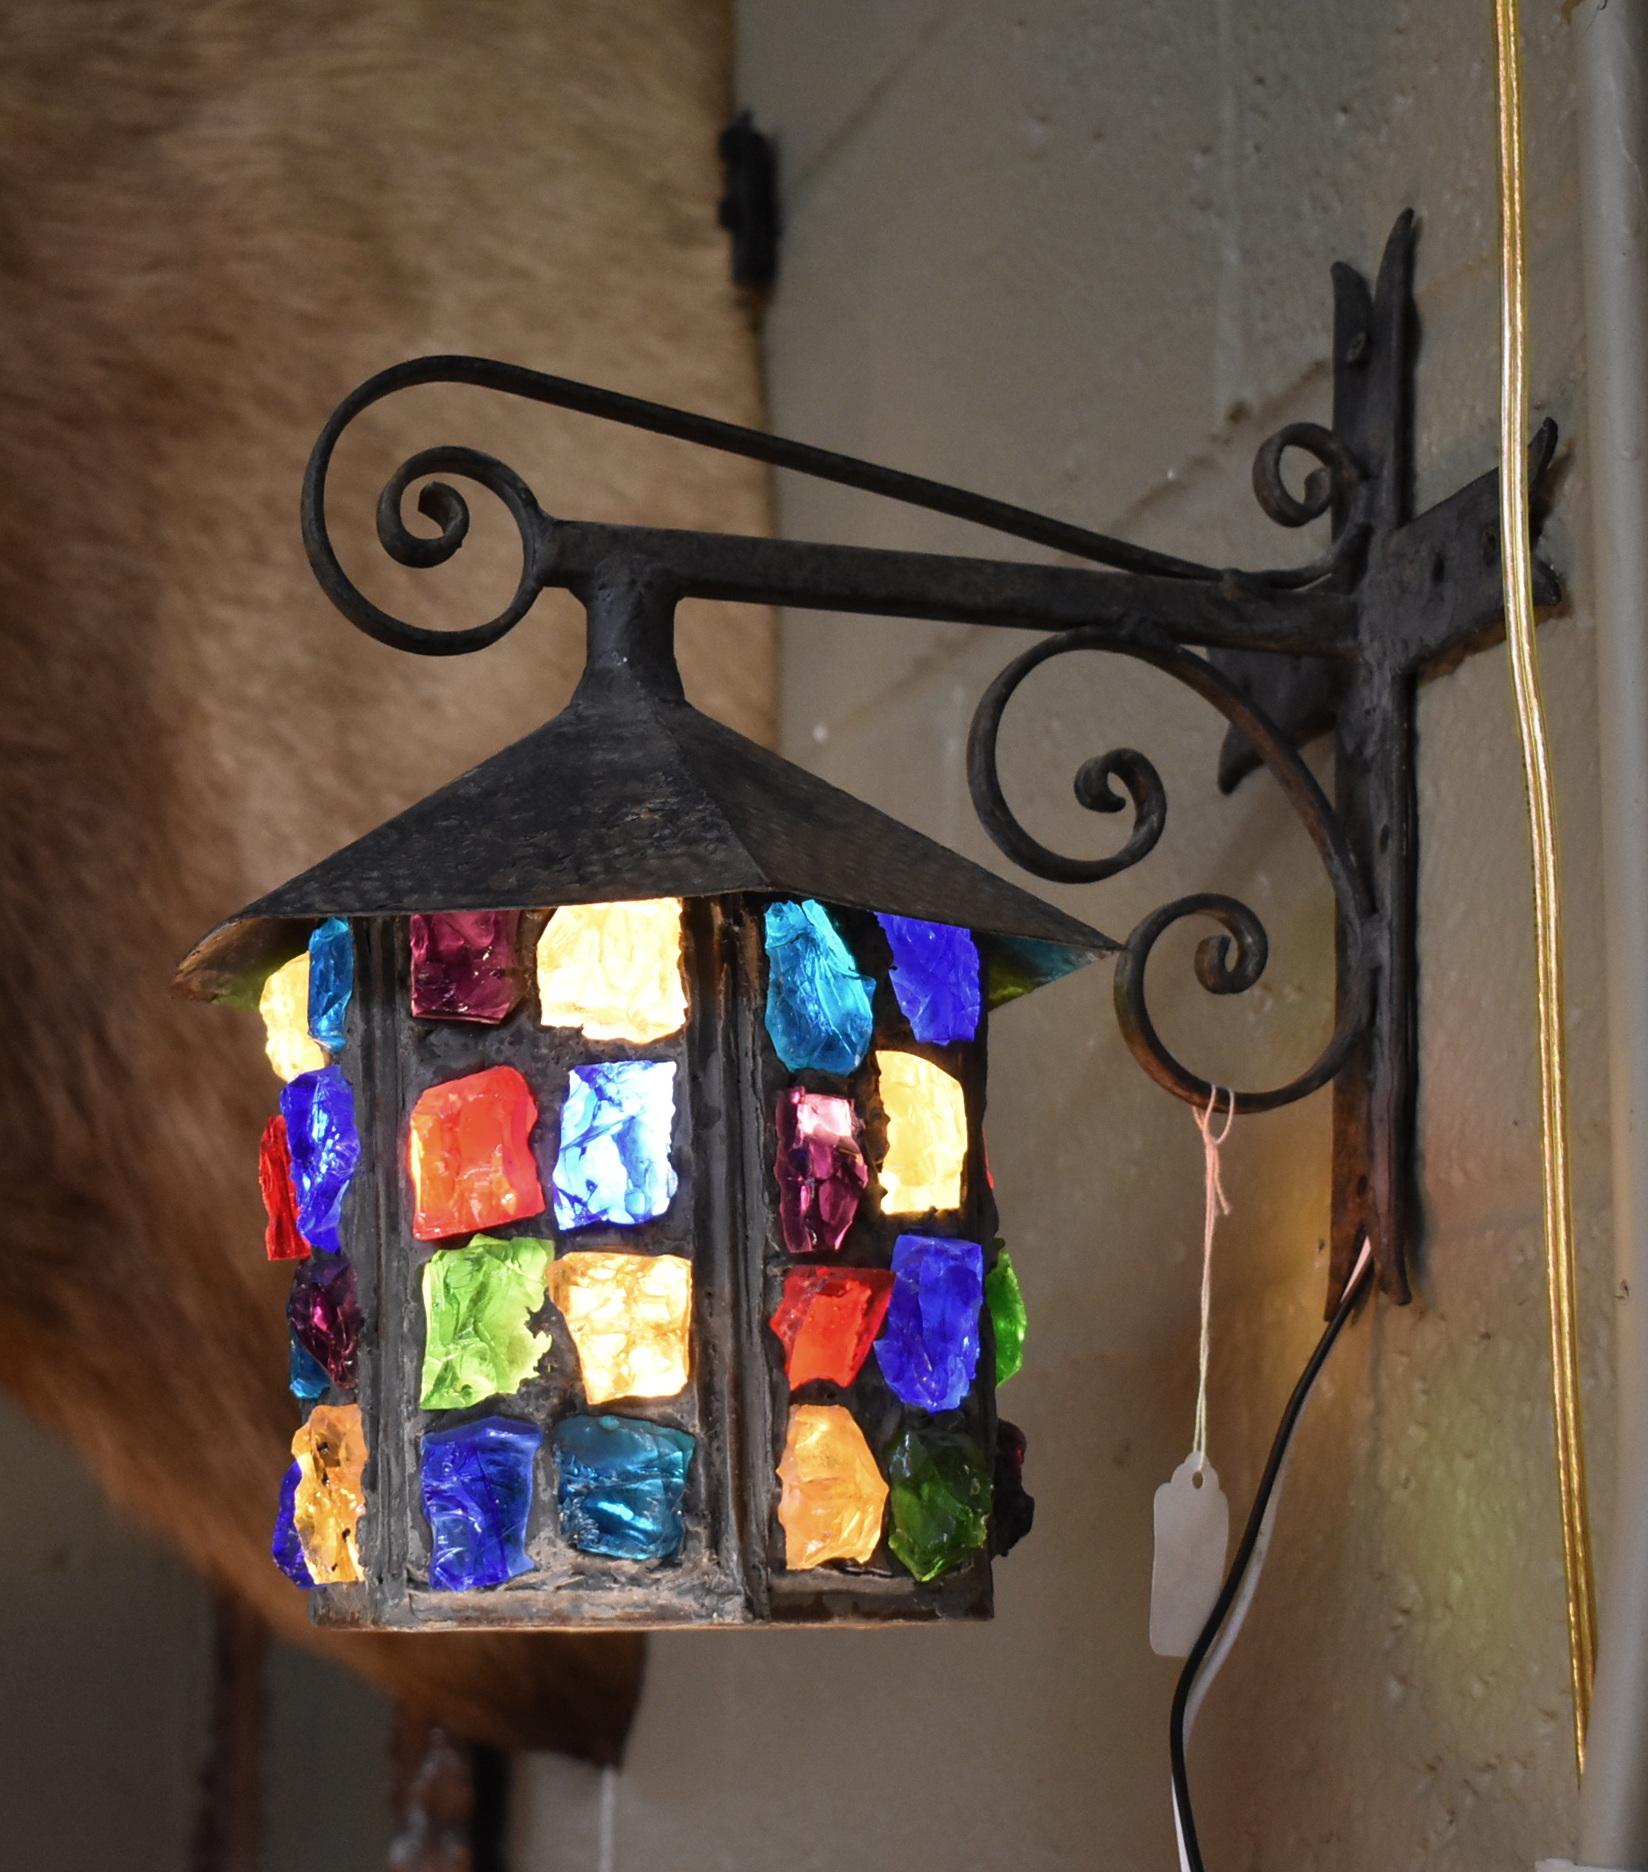 Single socket Tudor iron and multicolored chunk glass lantern by English designer Peter Marsh. Wrought iron bracket supports sconce. Cross form wall mount. Bracket arm protrudes 9